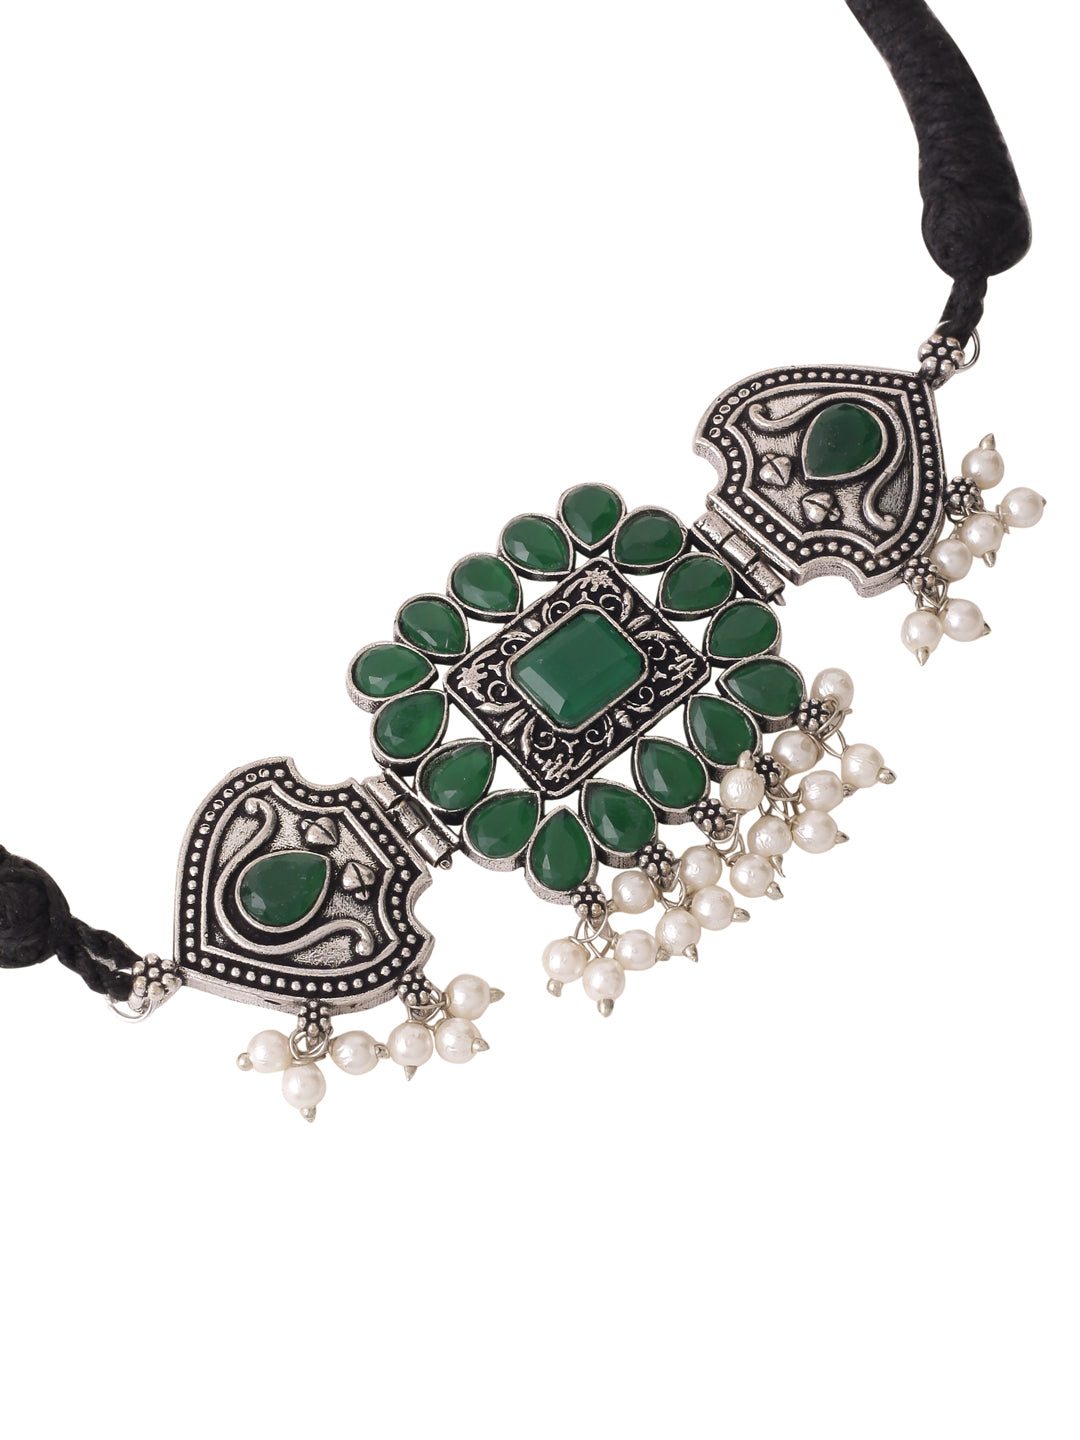 Women's Oxidised Silver Plated Green Color stone Jewellery Set with Earrings - NVR